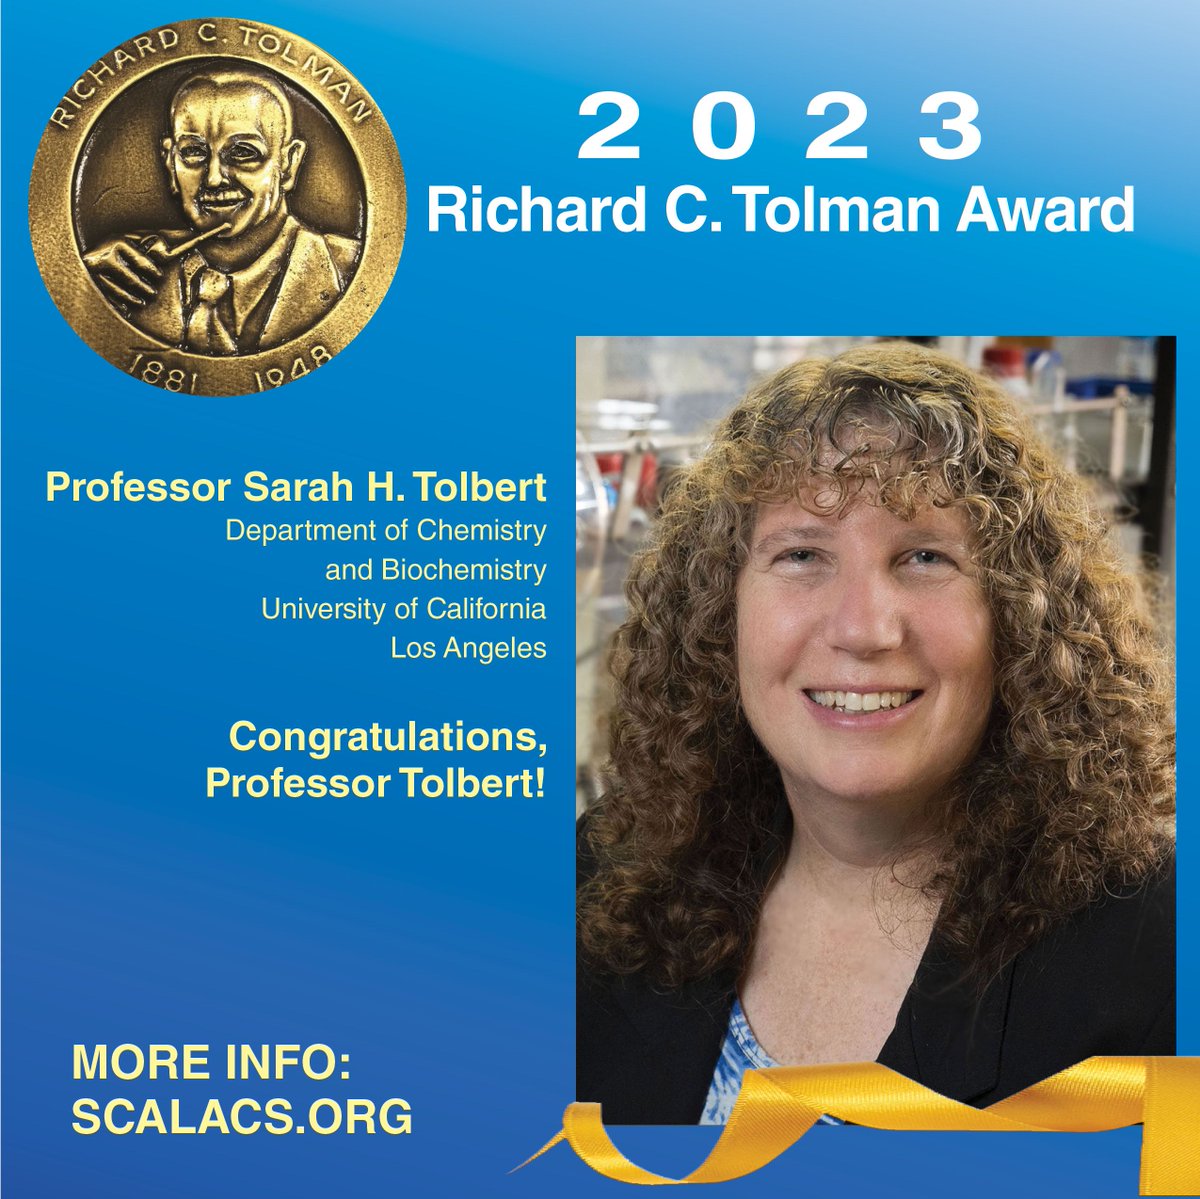 The 2023 Tolman Award recipient is Professor Sarah H. Tolbert, Department of Chemistry and Biochemistry at the University of California, Los Angeles for her research in Nanoscience and Materials Chemistry. Congratulations, Professor Tolbert! #scalacs #tolmanaward